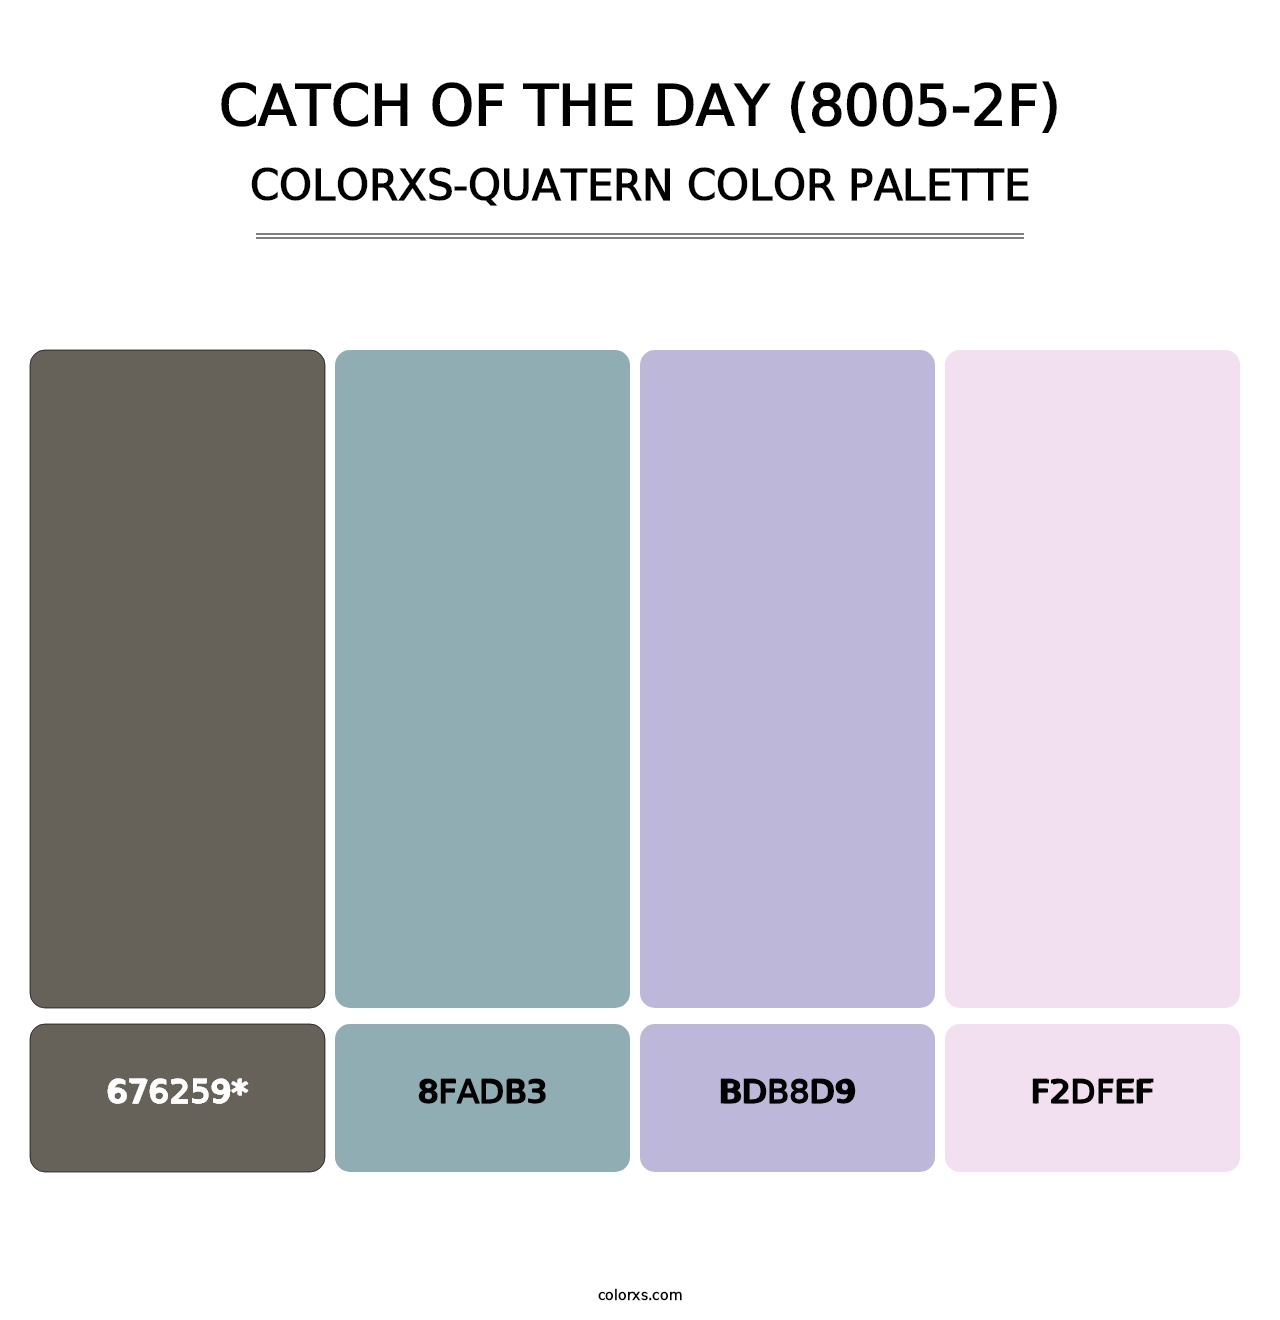 Catch of the Day (8005-2F) - Colorxs Quatern Palette